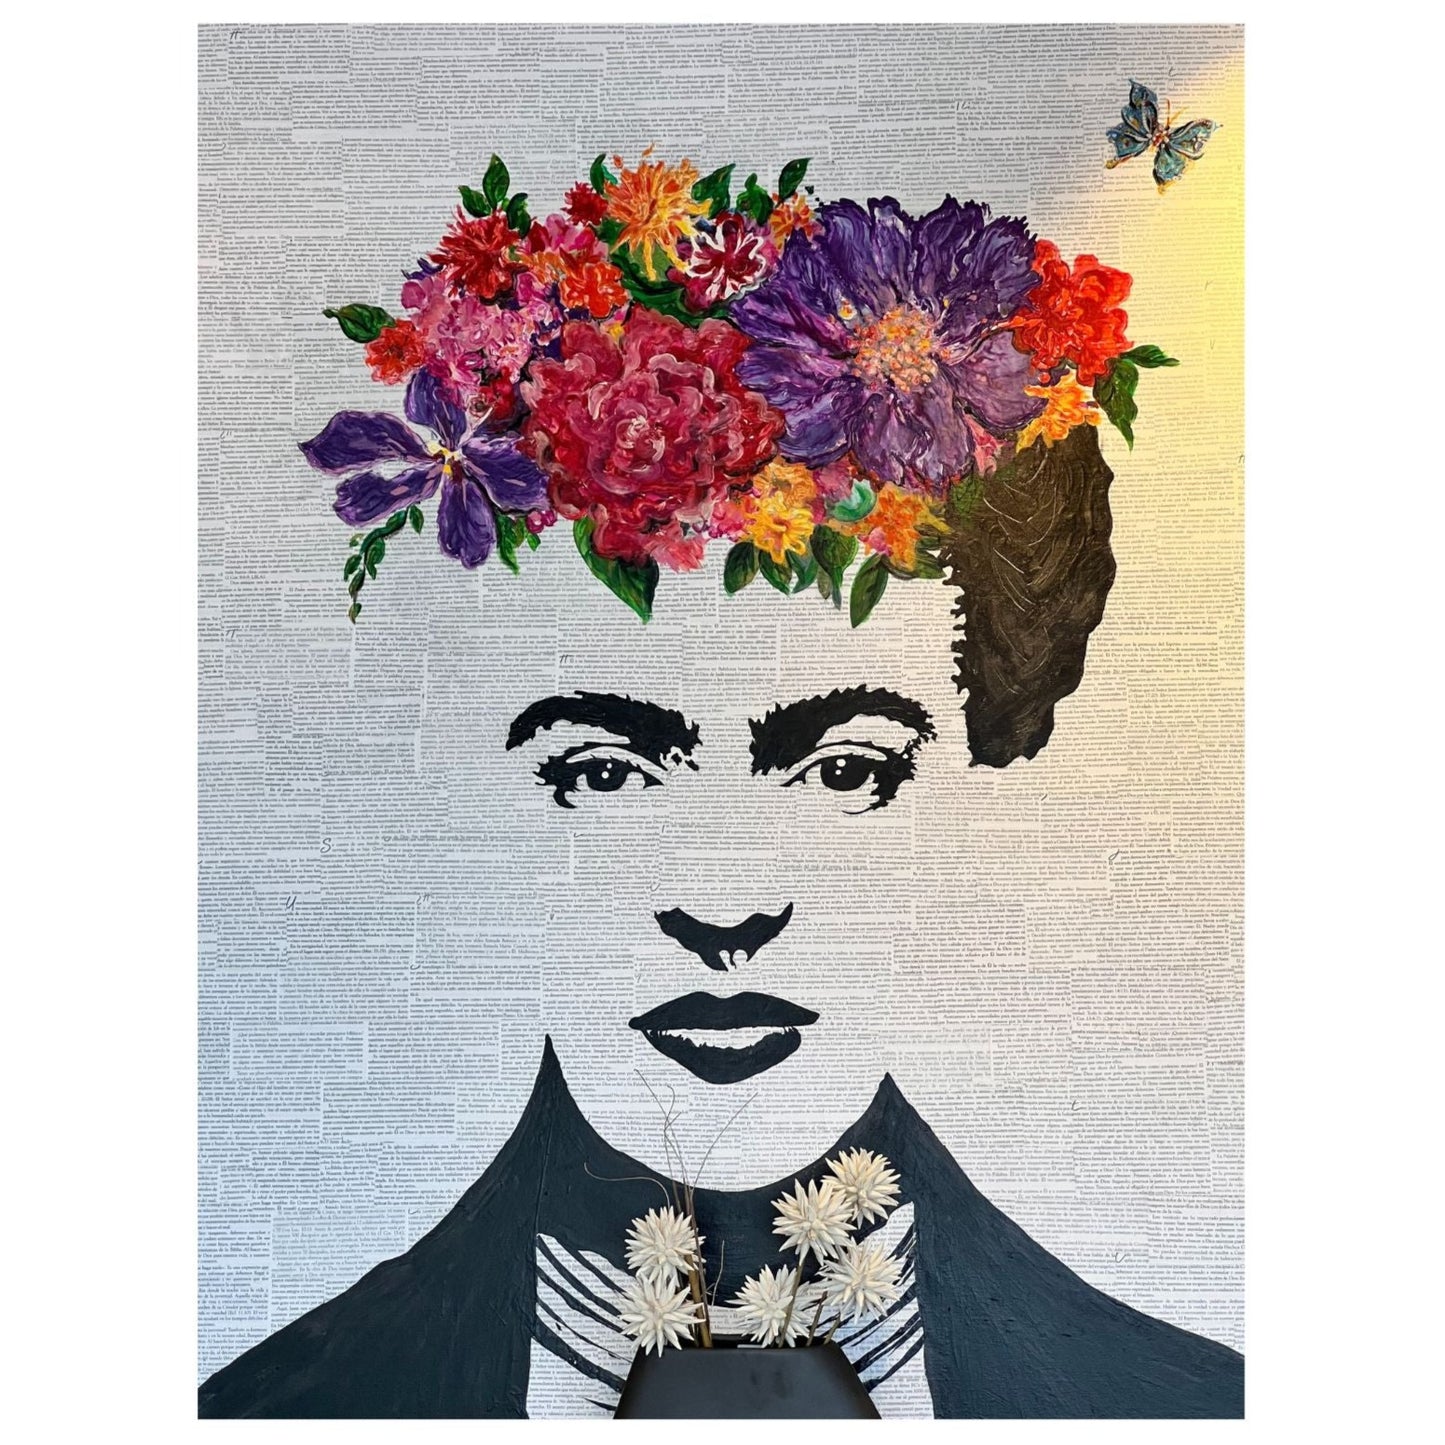 Local artist. Freda with flowers on head, face features overlay fine newspaper print.